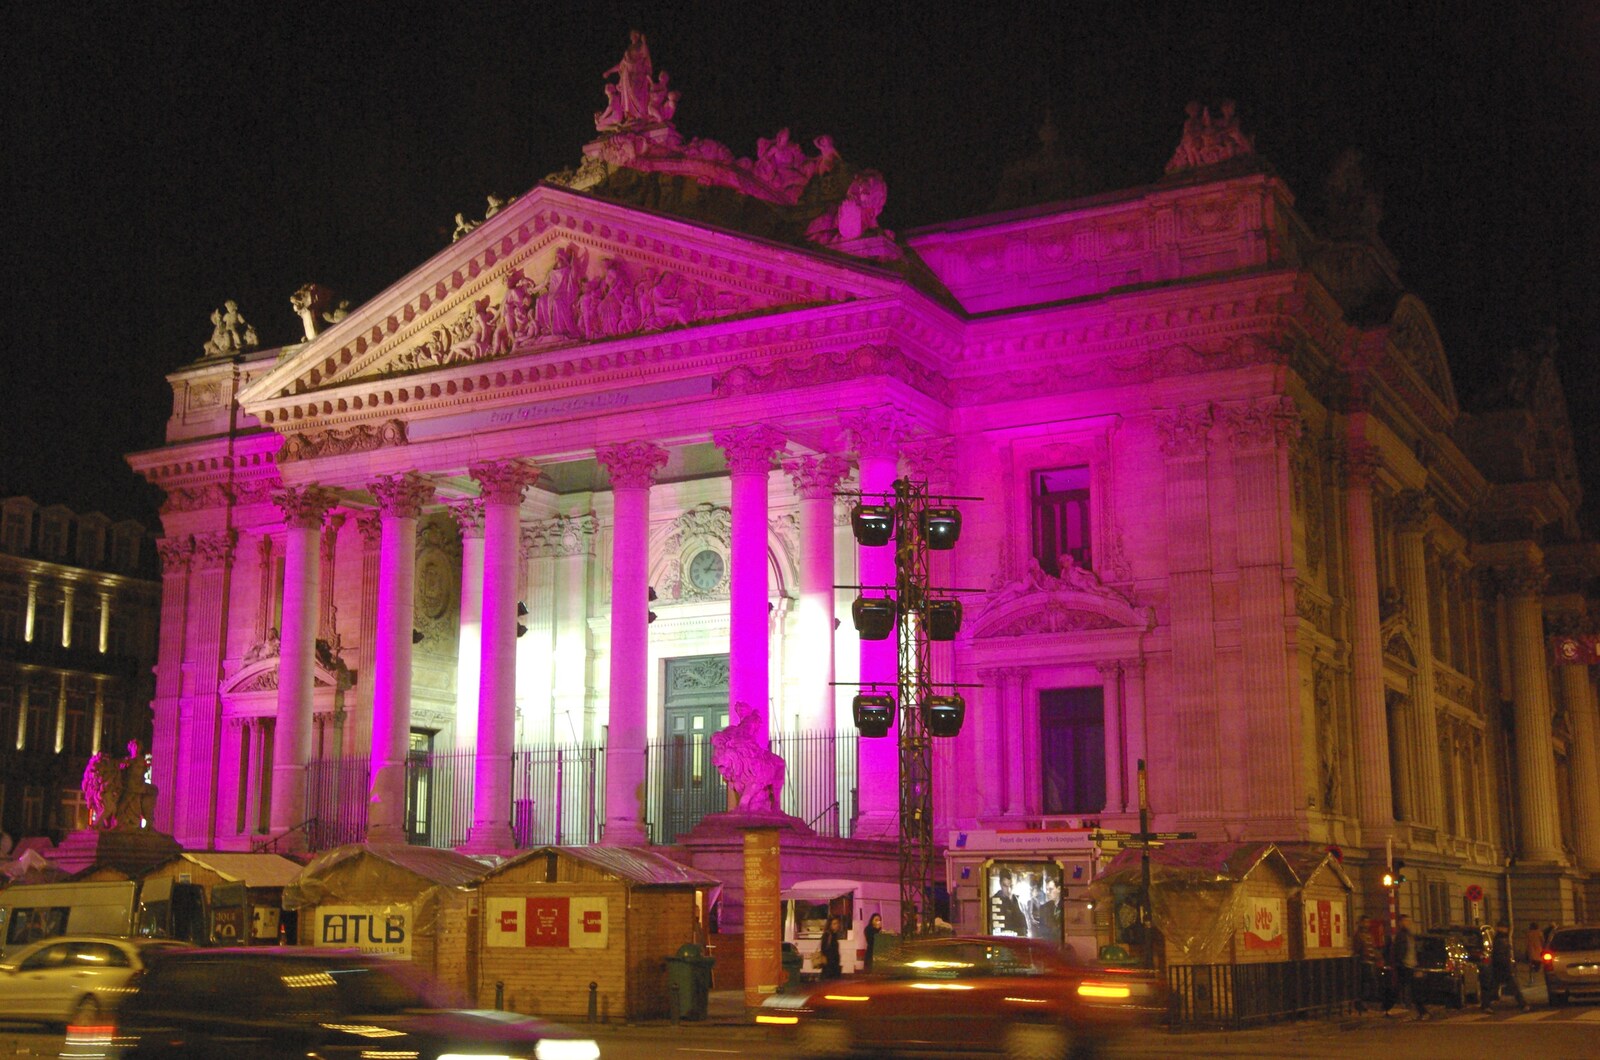 A grand building lit up in pink from The Christmas Markets of Brussels, Belgium - 1st January 2007